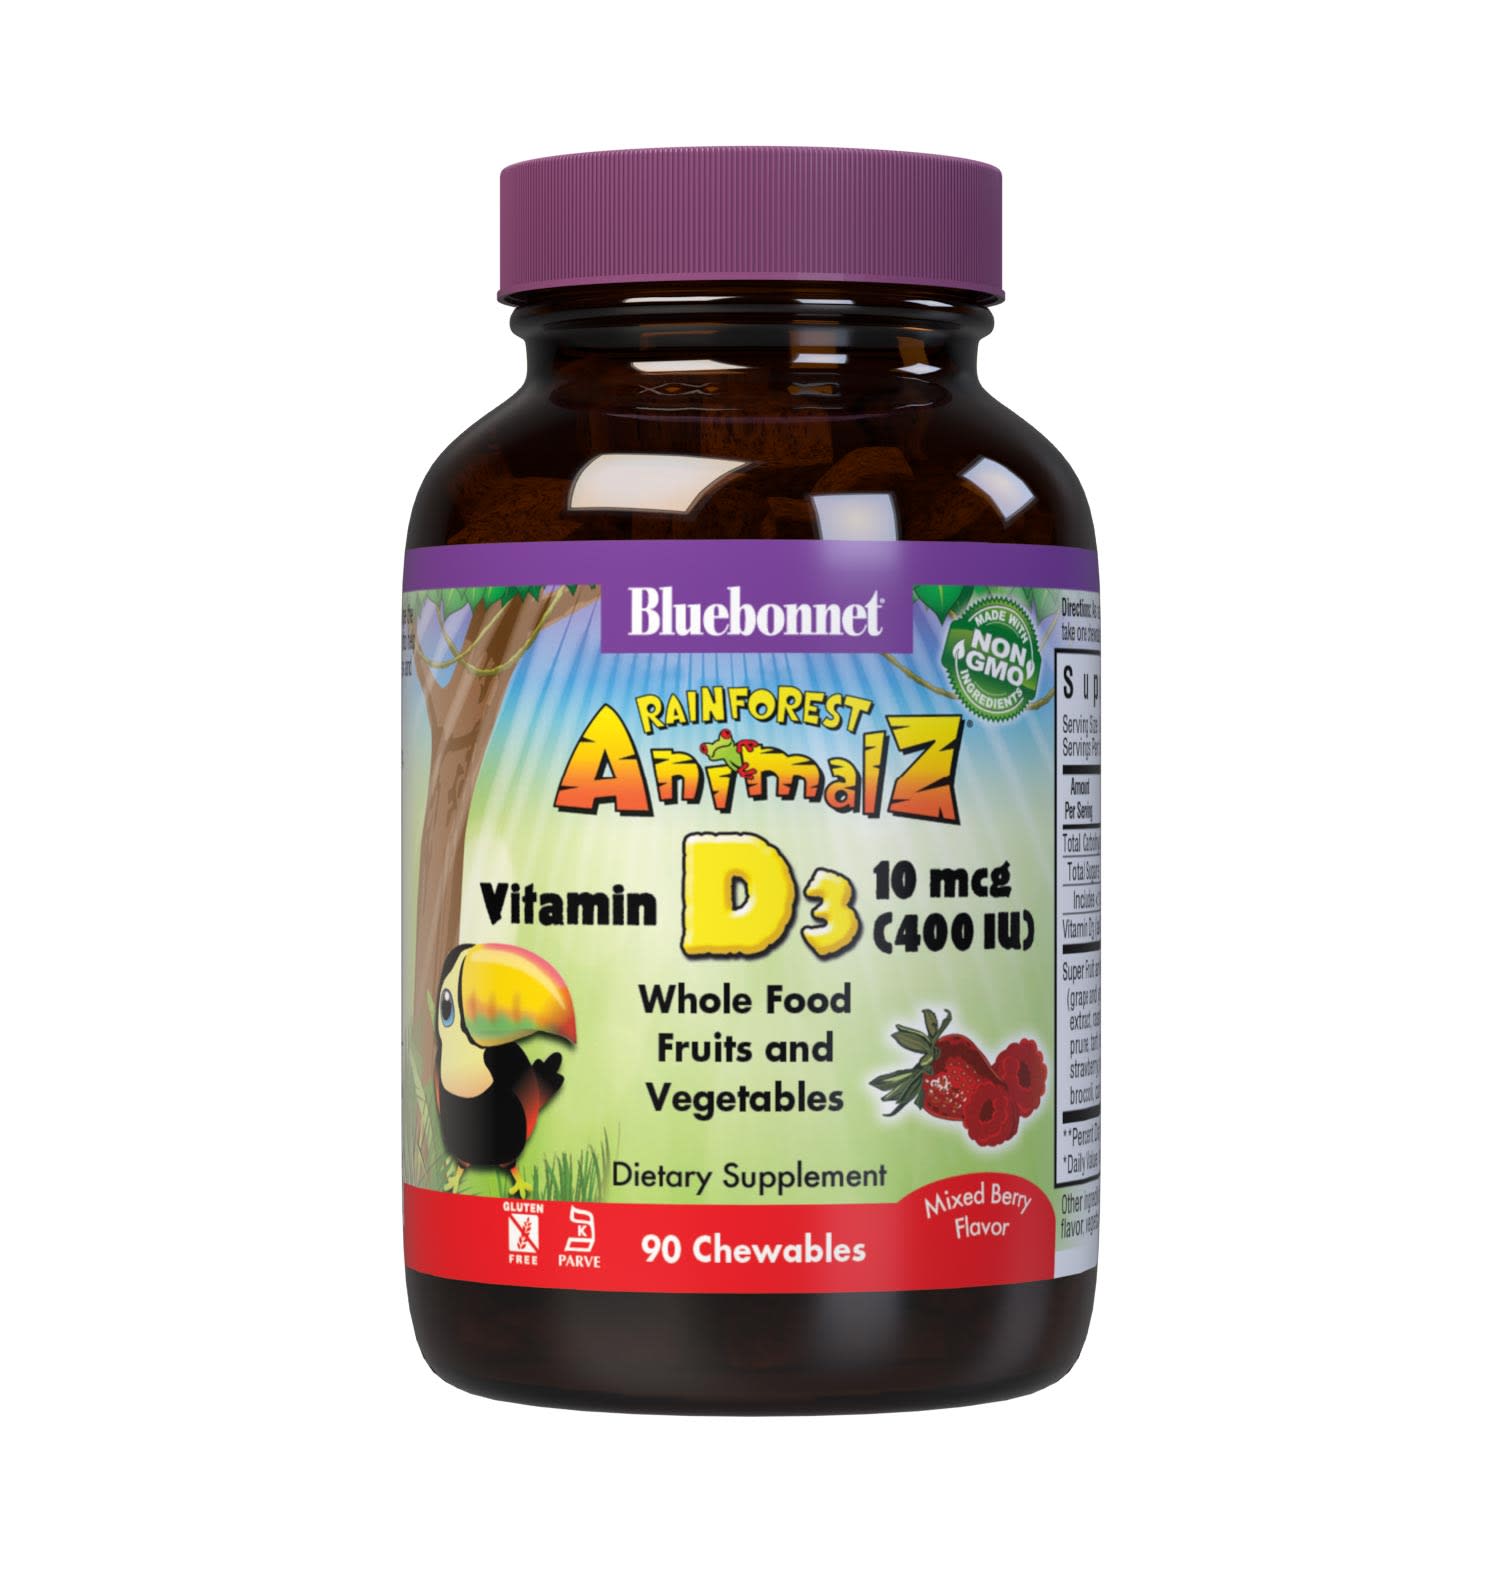 Bluebonnet's Rainforest Animalz® Vitamin D3 400 IU helps bridge the nutrient gap often found in children's diets with a vitamin D3 (cholecalciferol) in a base of super fruits and vegetables to help support strong health bones and immune function. All this in just one yummy chewable per serving. #size_90 count